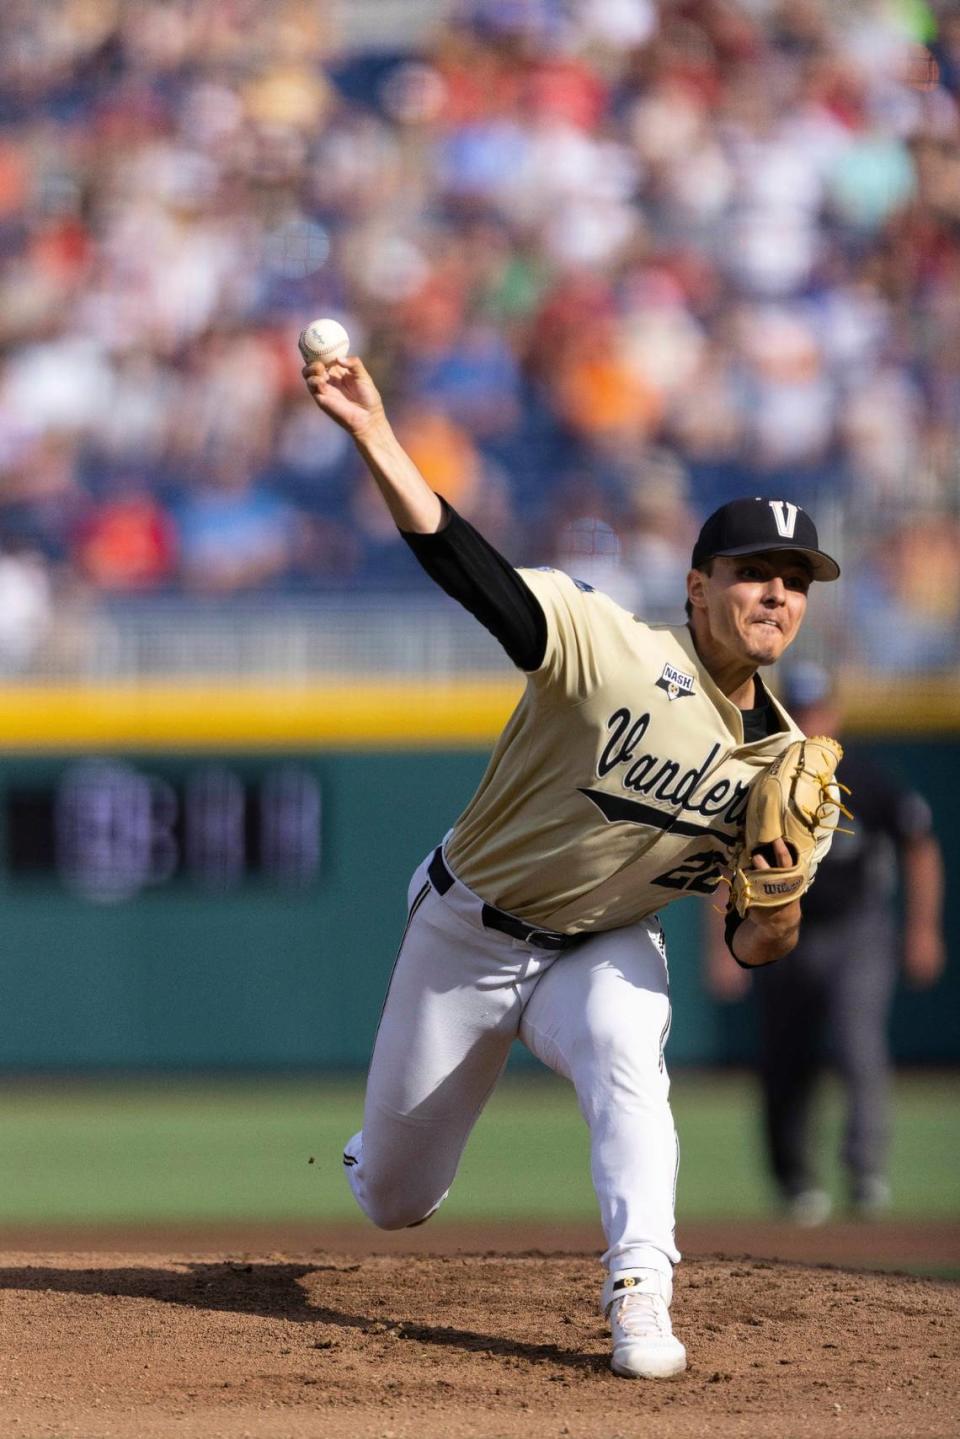 Vanderbilt starting pitcher Jack Leiter throws against North Carolina State in the first inning during a baseball game in the College World Series, Monday, June 21, 2021, at TD Ameritrade Park in Omaha, Neb. (AP Photo/Rebecca S. Gratz)